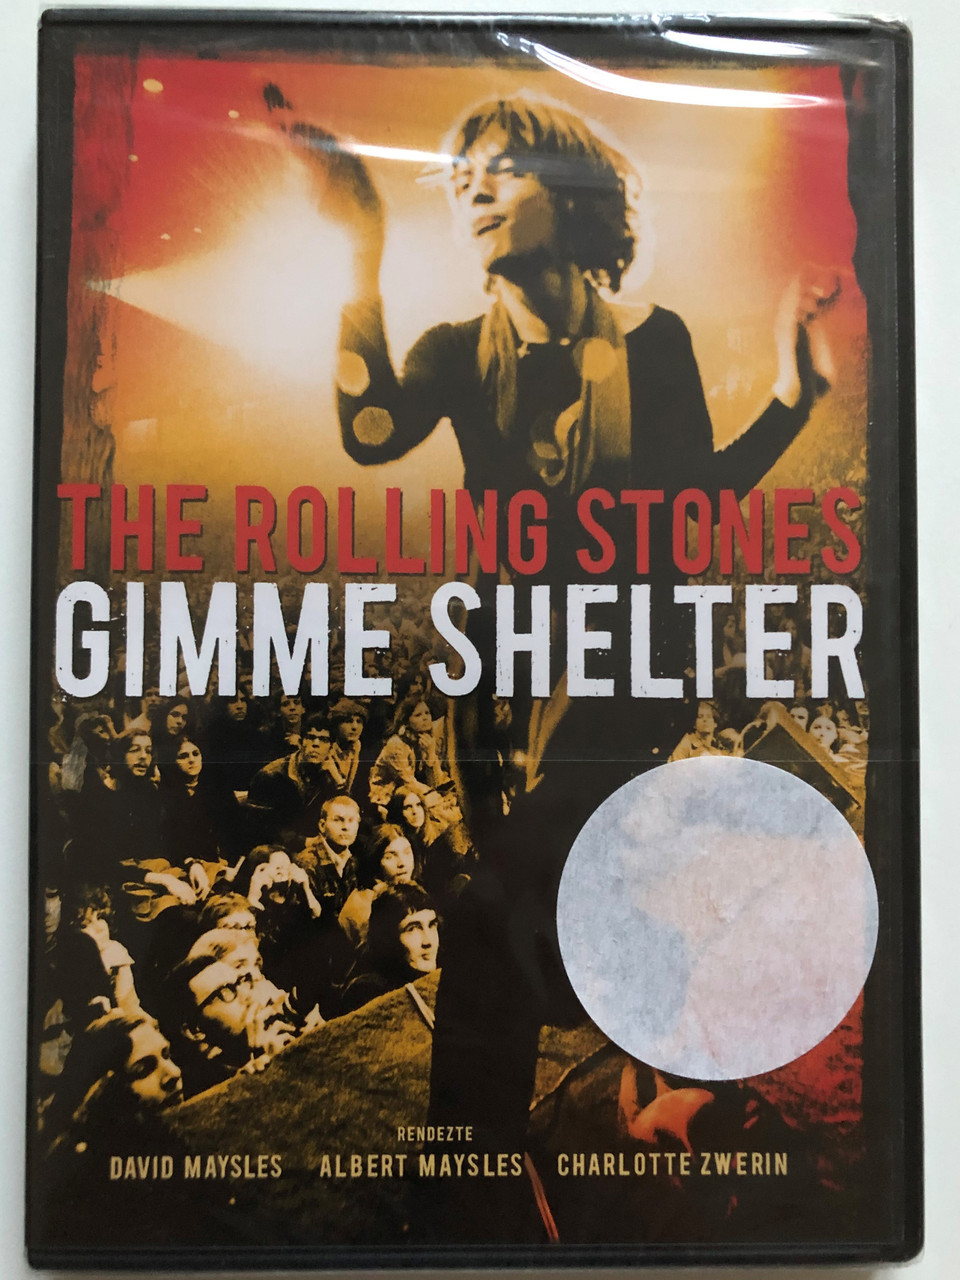 The rolling Stones - Gimme Shelter DVD 1970 / Directed by David Maysles,  Albert Maysles, Charlotte Zwerin / Documentary chronicling the last weeks  of The Rolling Stones' 1969 US tour - bibleinmylanguage